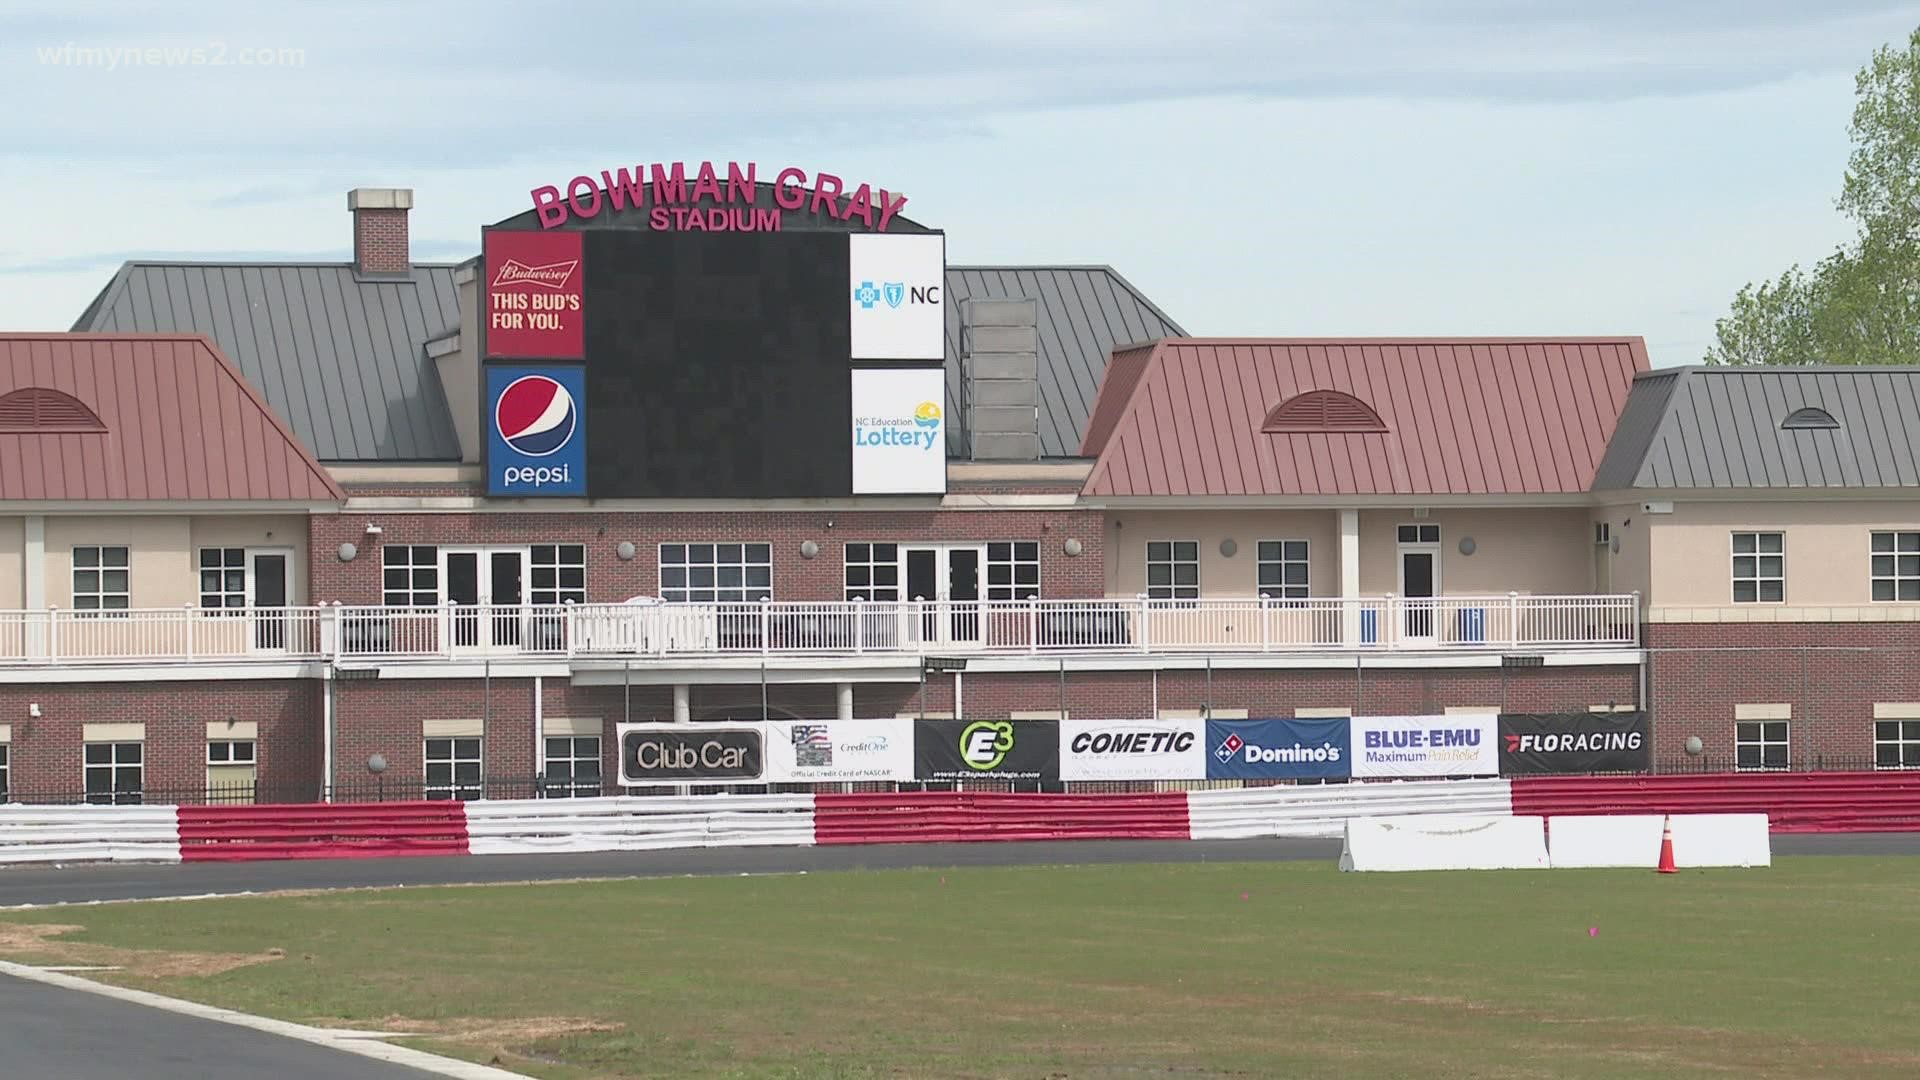 The renovations include new concession stands, a freshly sodded football field, and better air-conditioning systems.